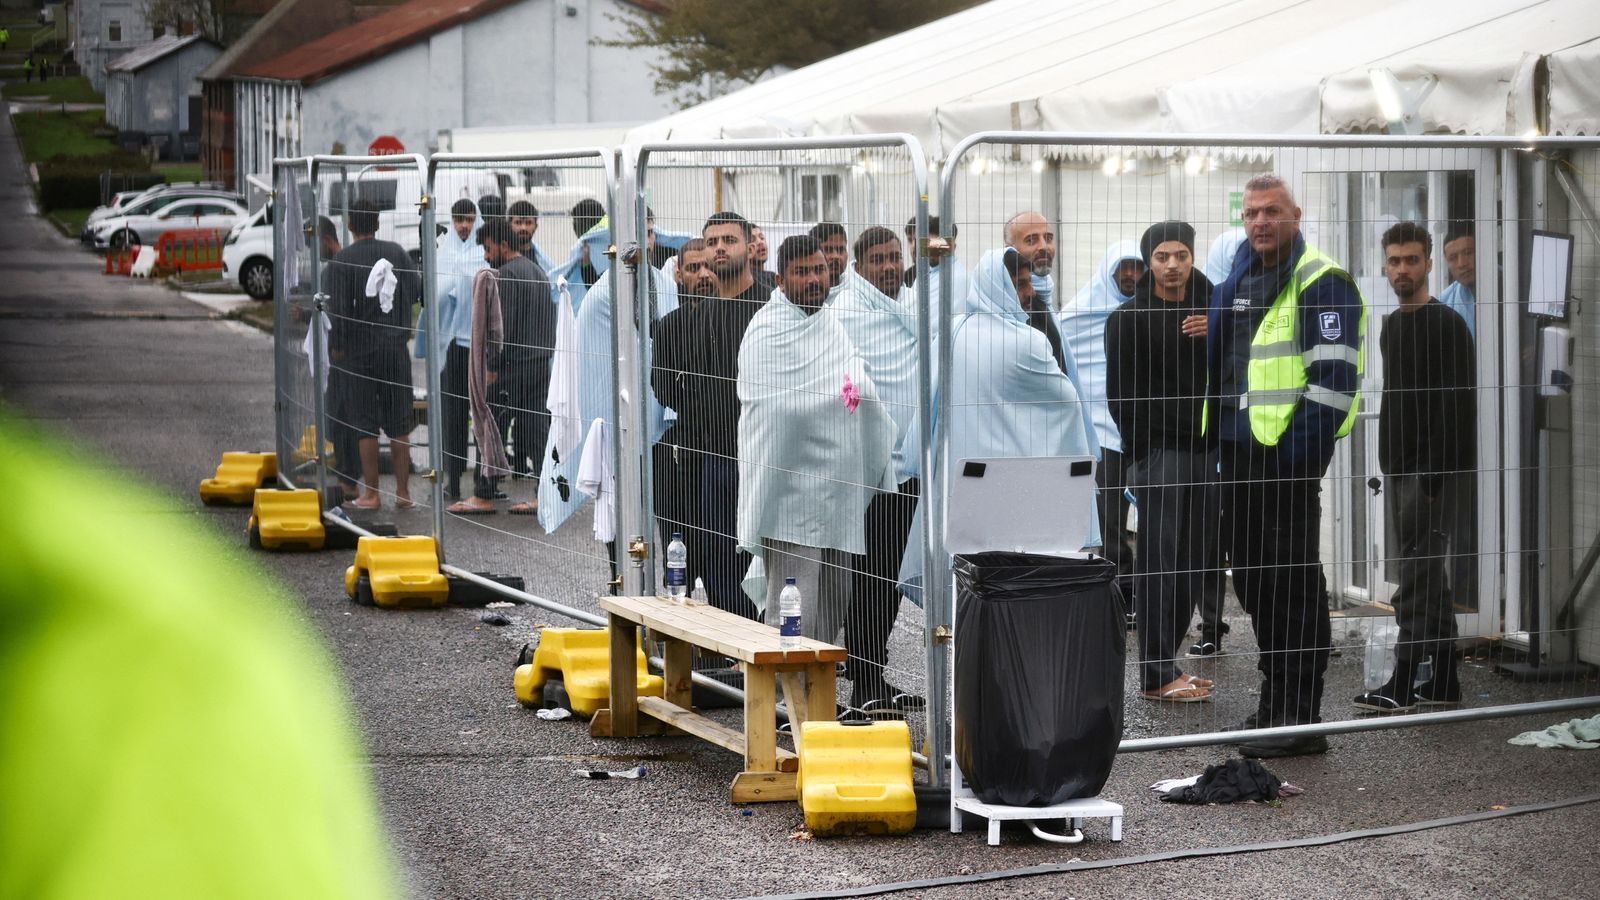 50 migrants recently arrived in UK diagnosed with diphtheria